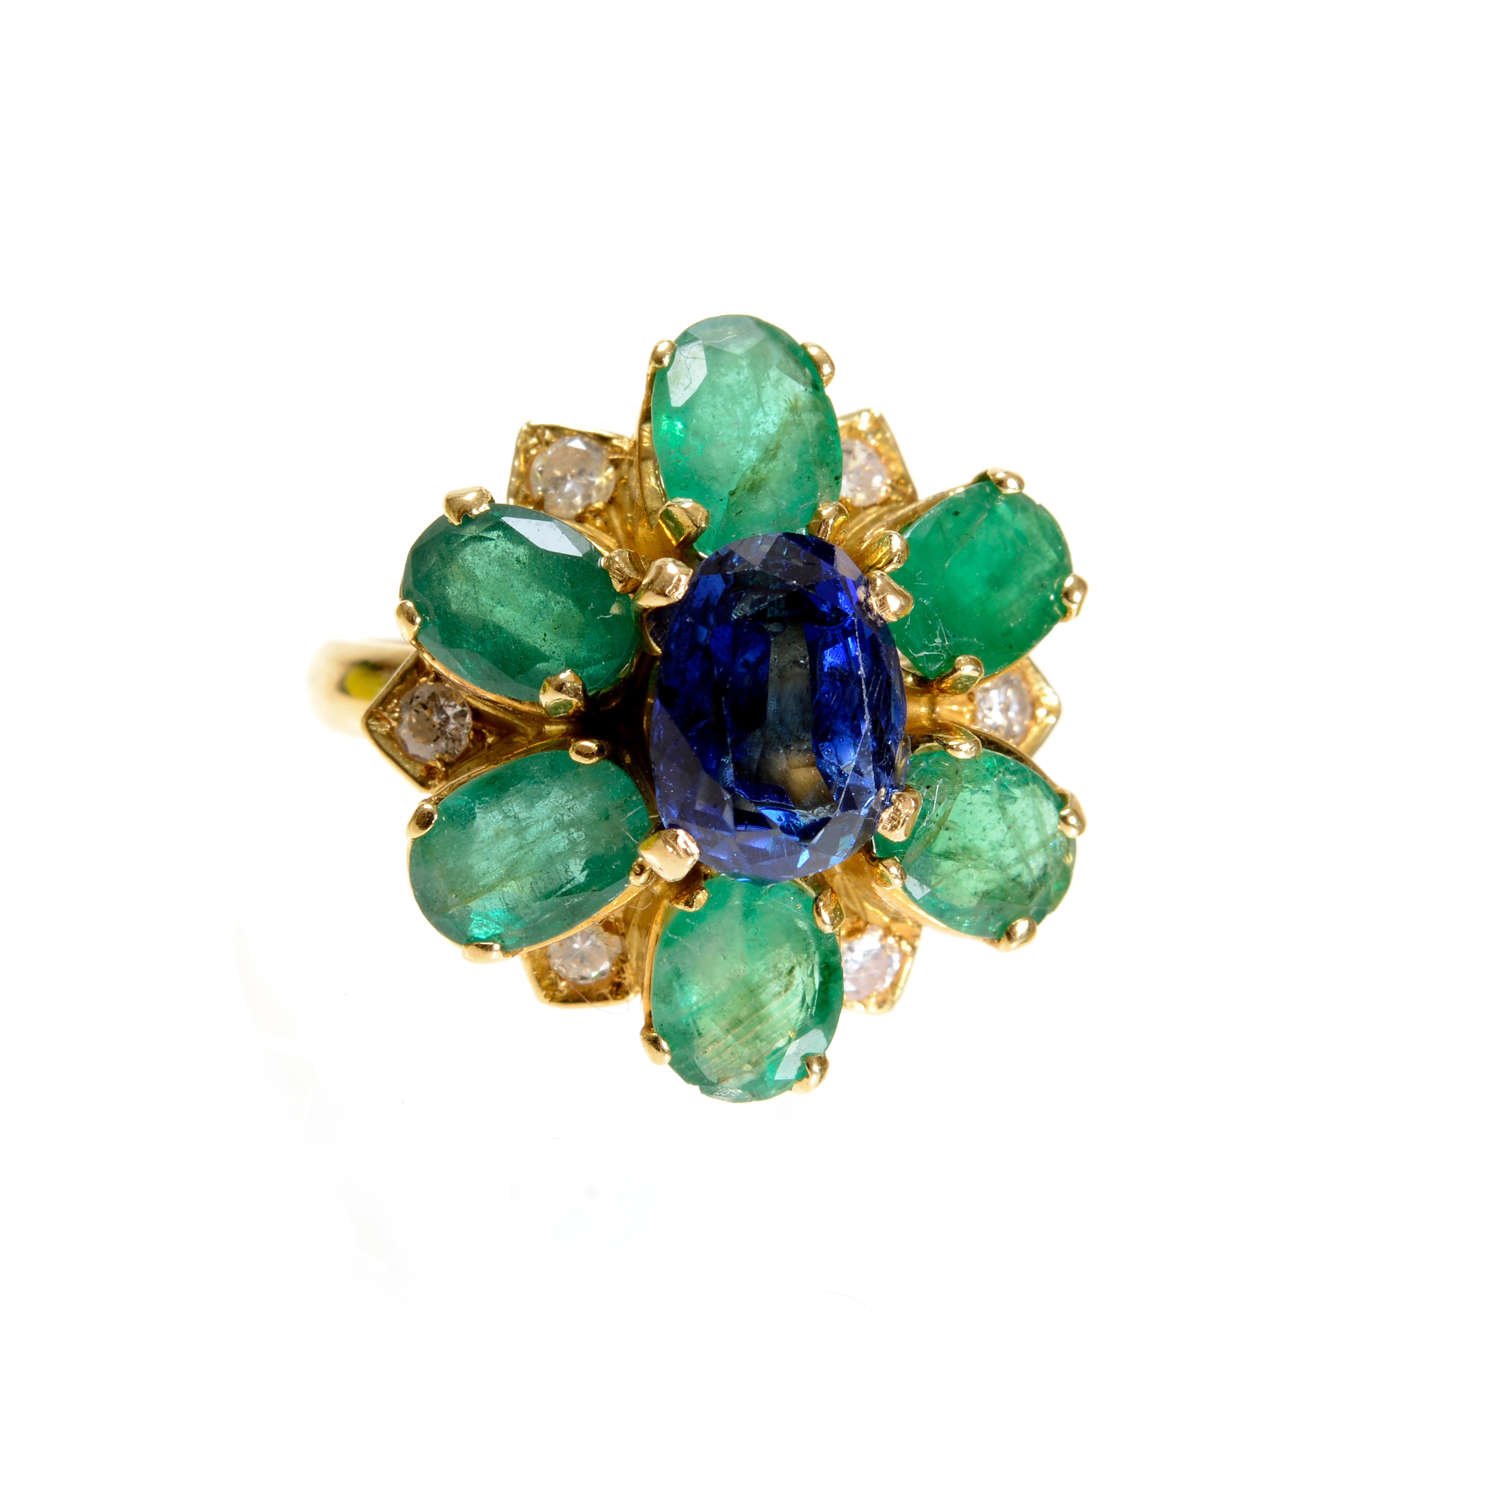 A striking sapphire, emerald and diamond cluster ring.